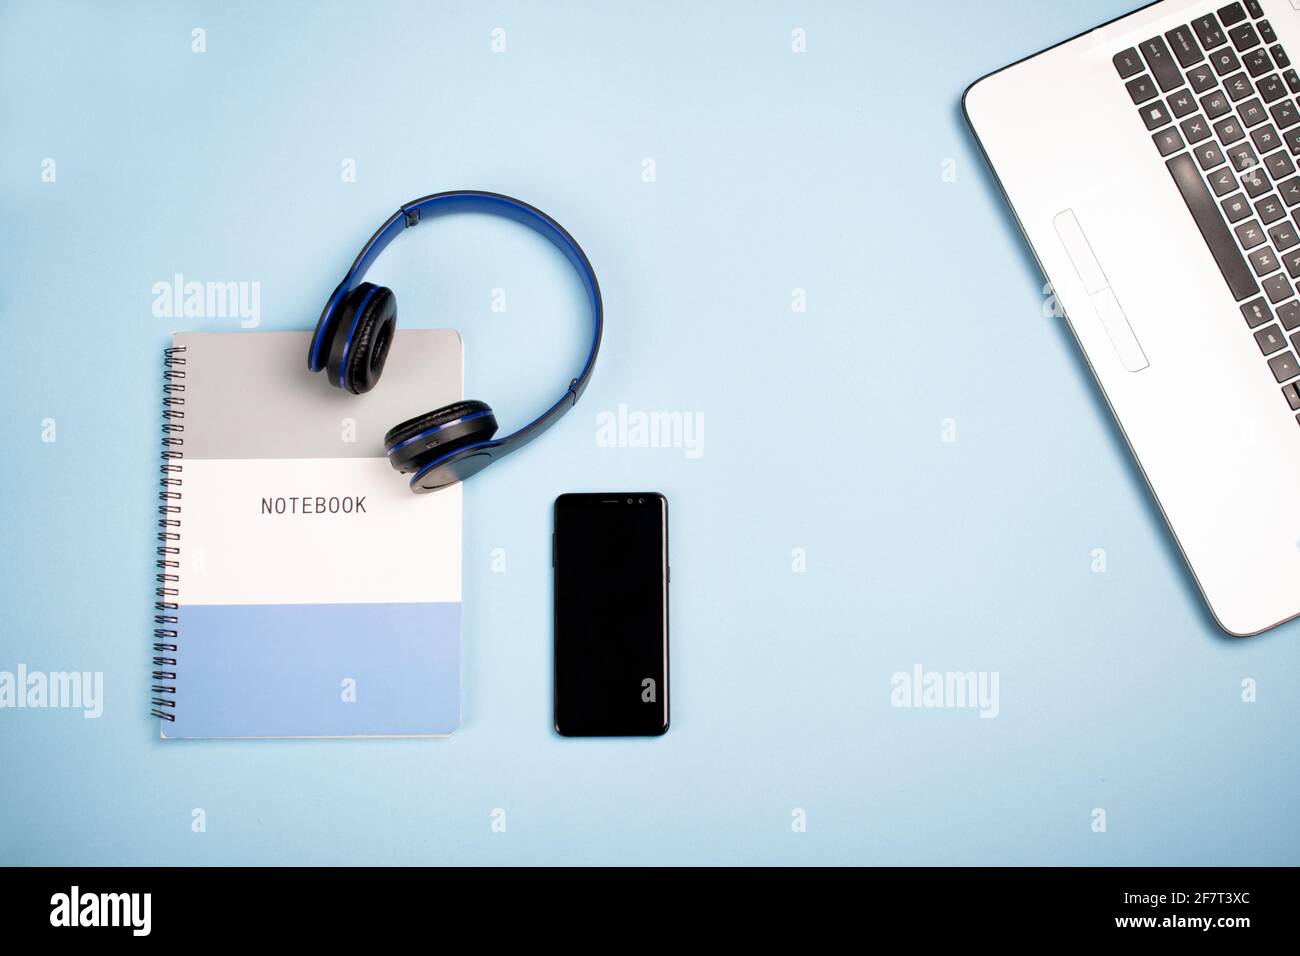 Notebook, headphones a mobile phone and laptop on a blue surface with a copy space Stock Photo